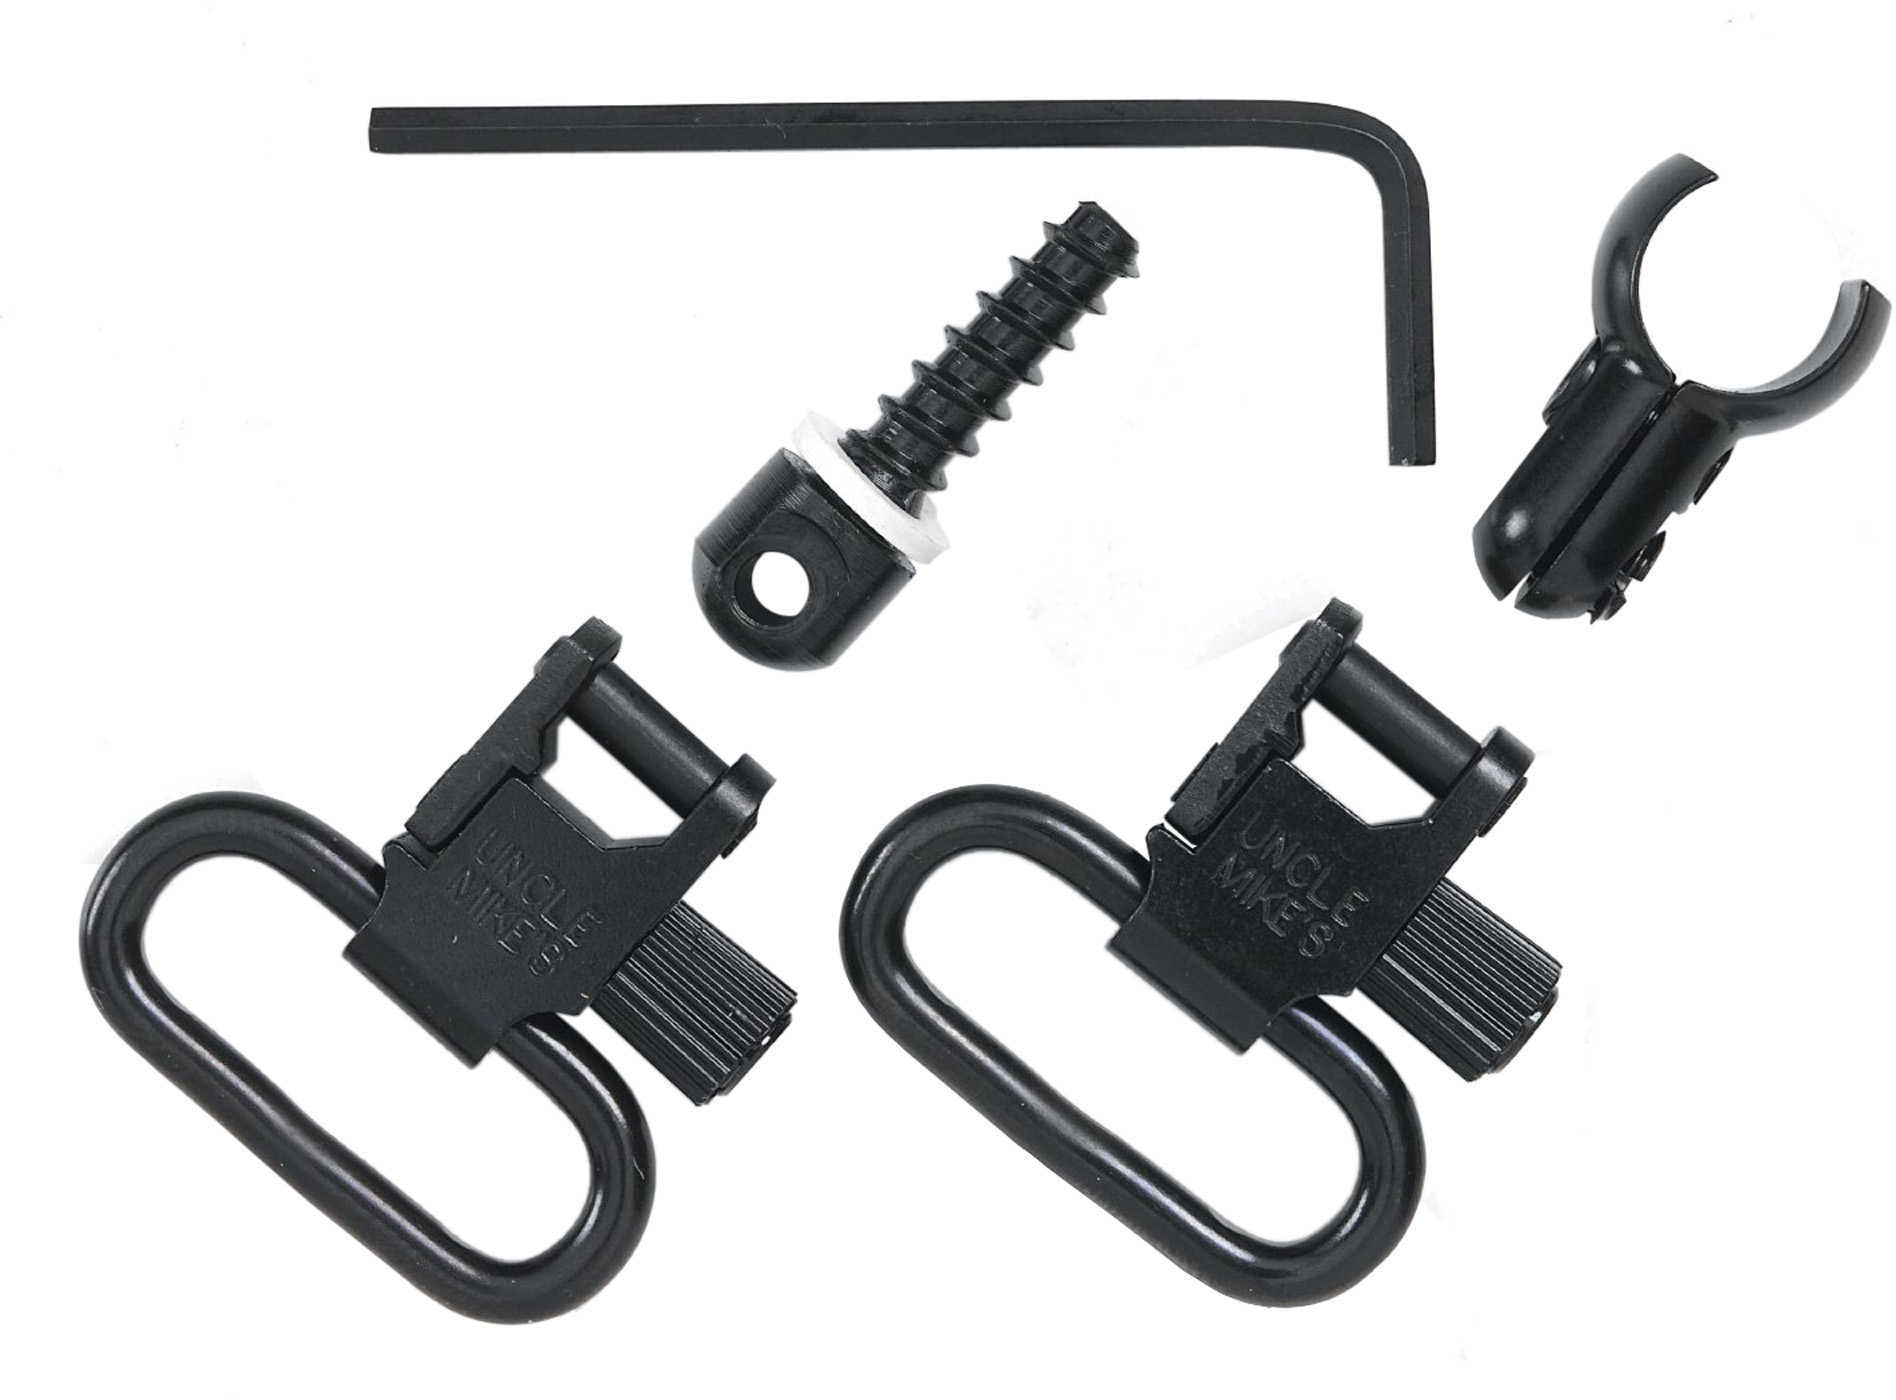 Uncle Mikes 1" Black Quick Detach Sling Swivels For .22 Caliber With Tubular Mag Md: 10712